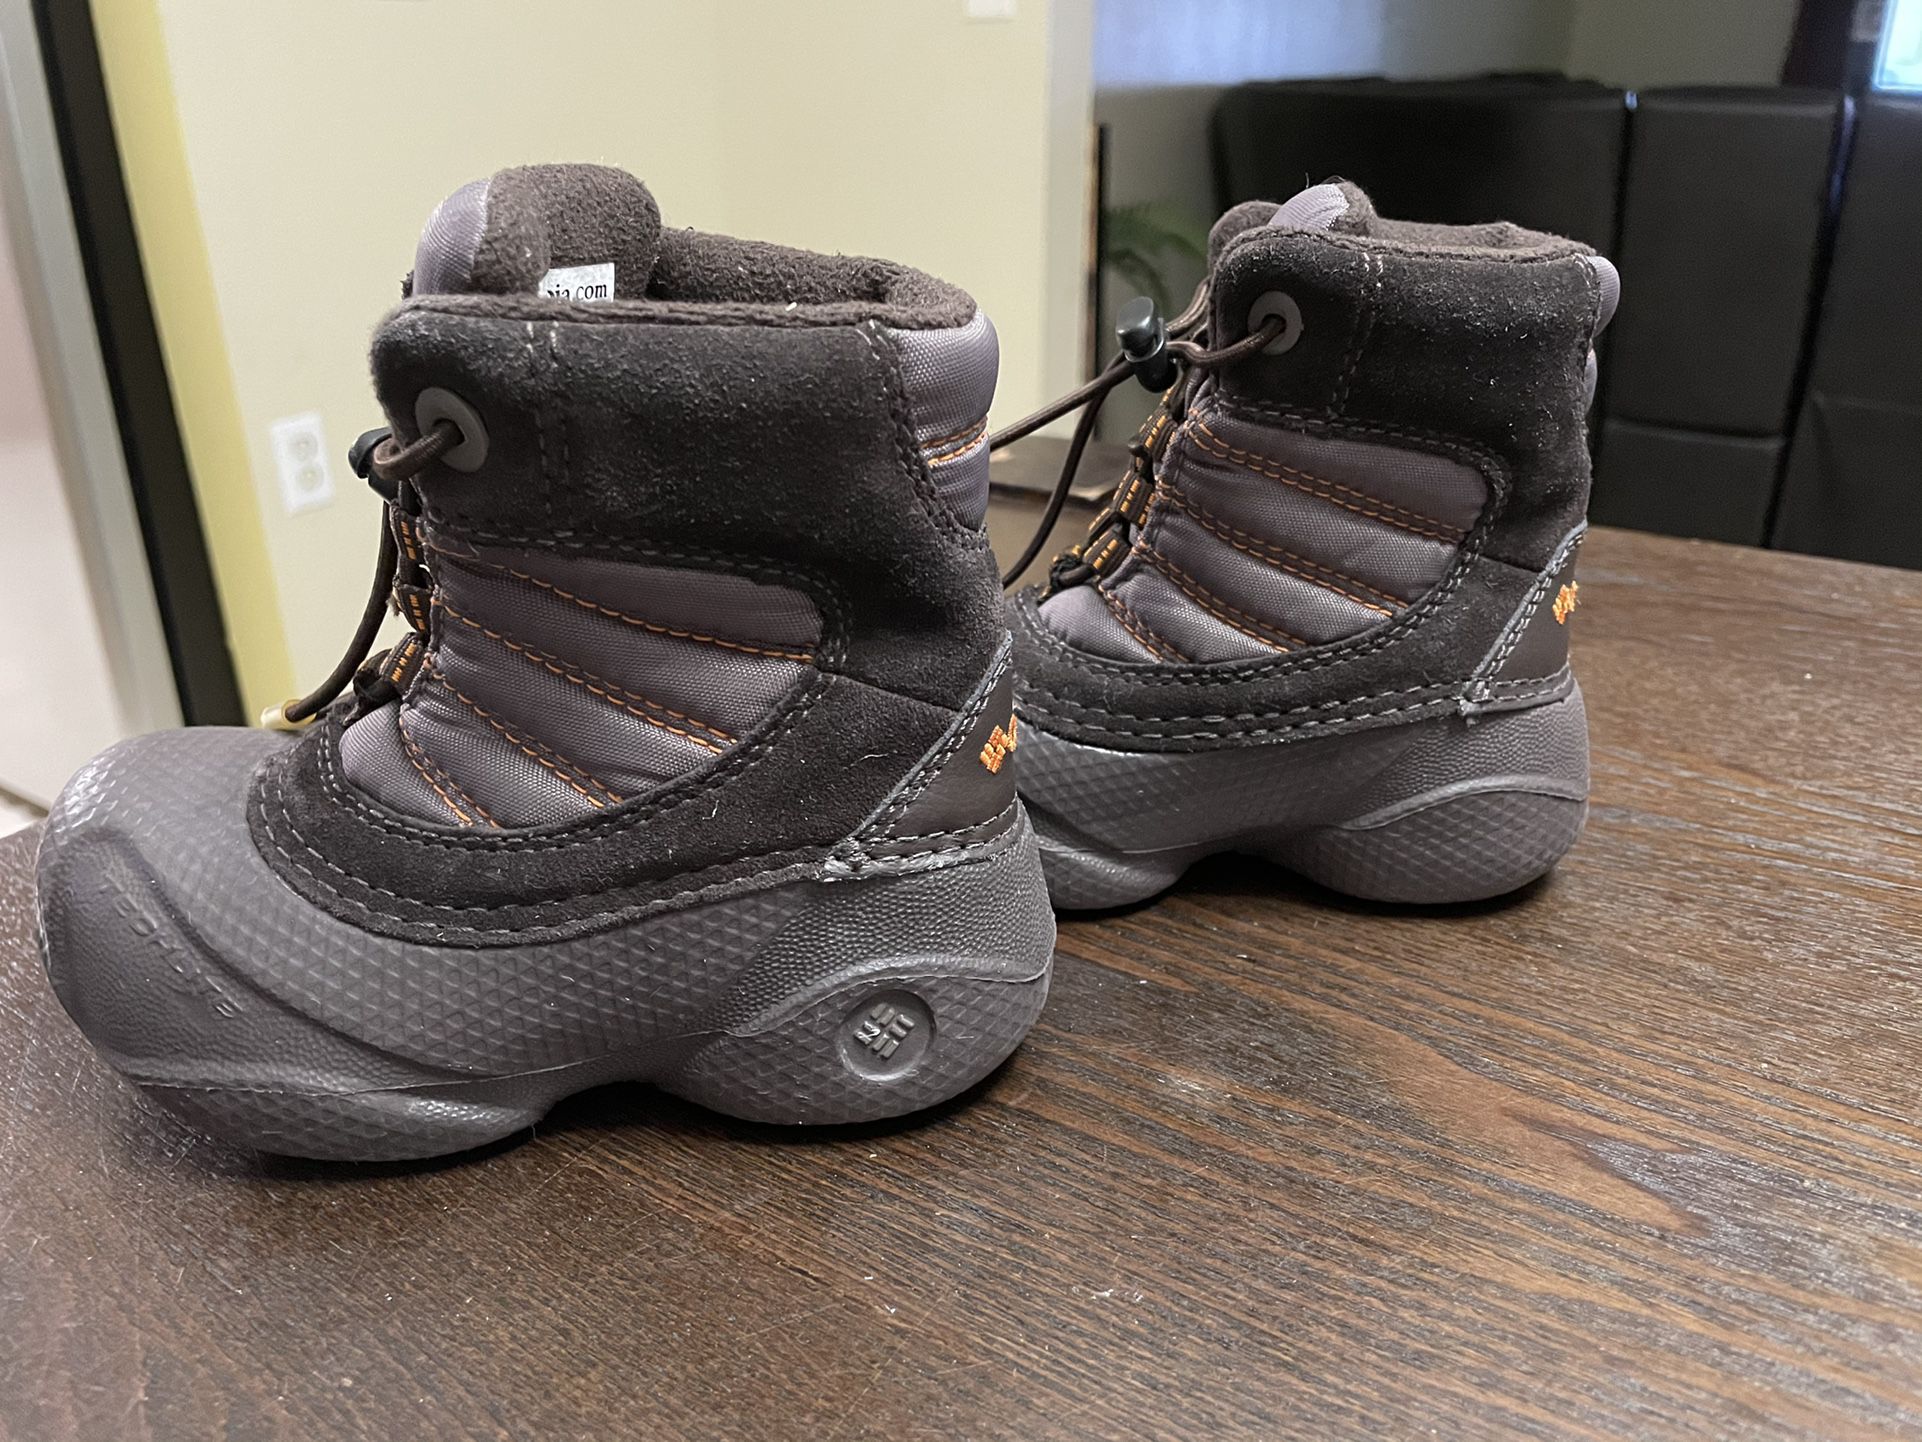 Columbia Snow Boots Toddler